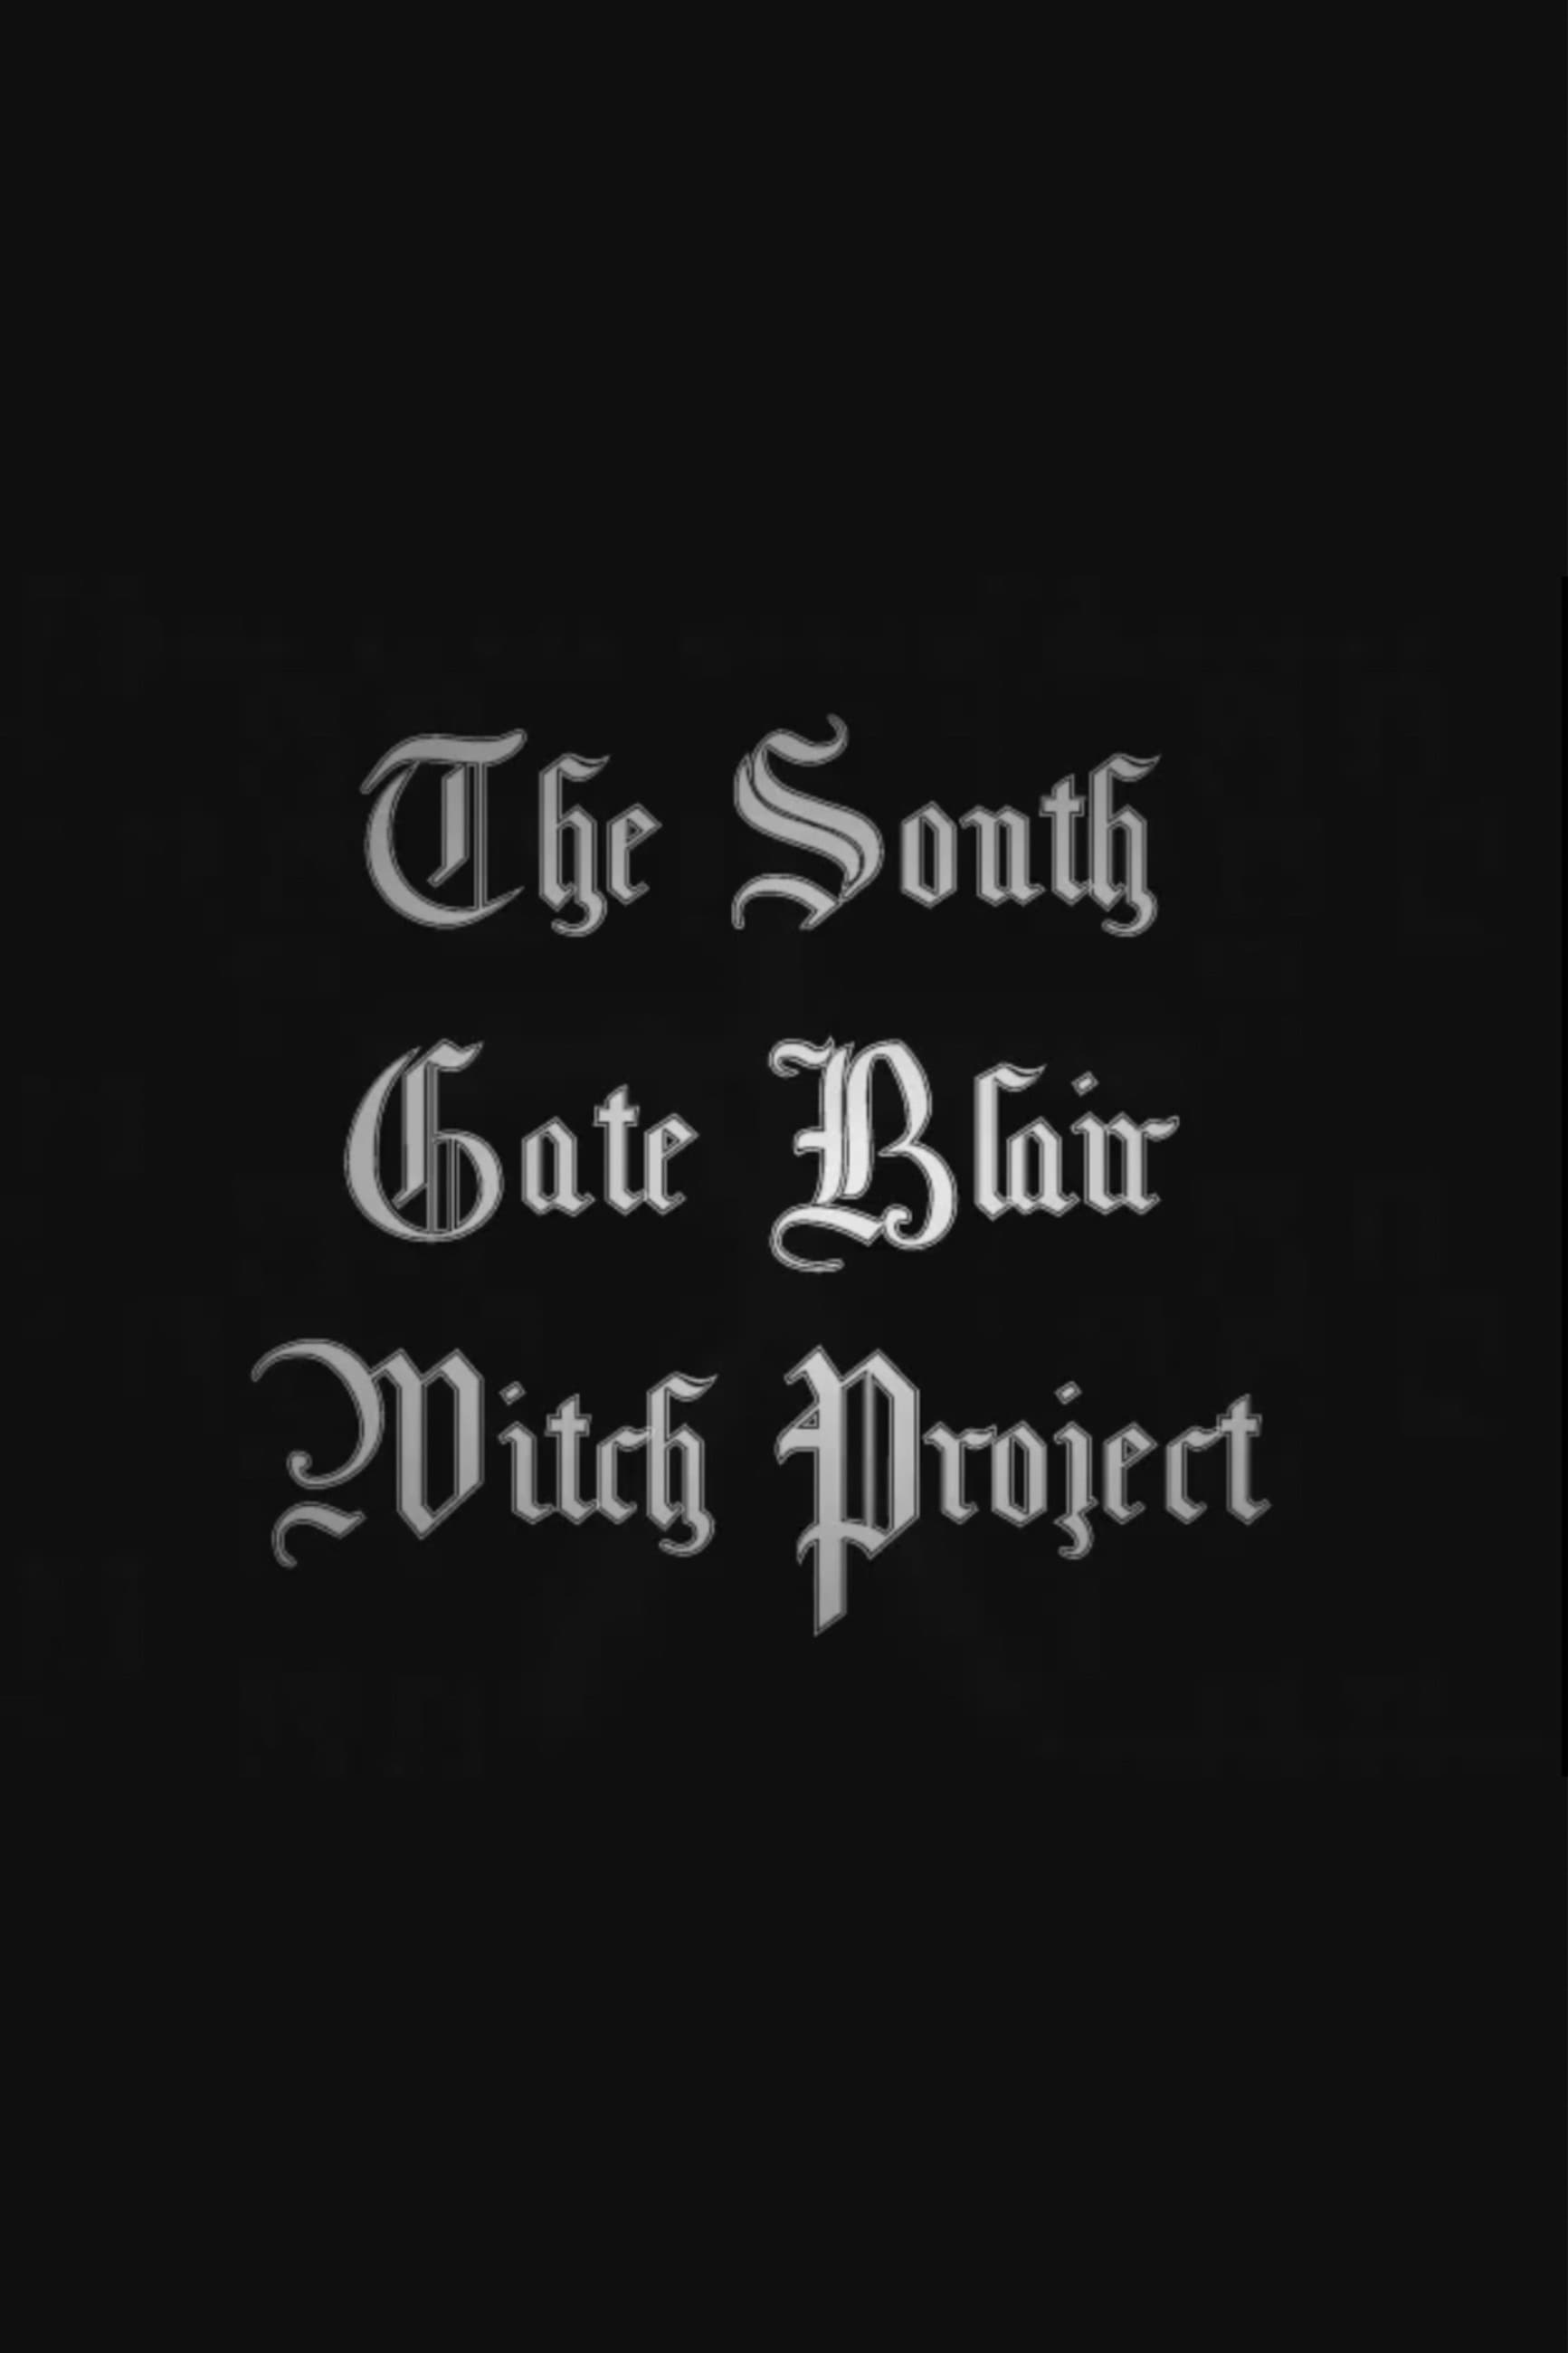 The South Gate Blair Witch Project